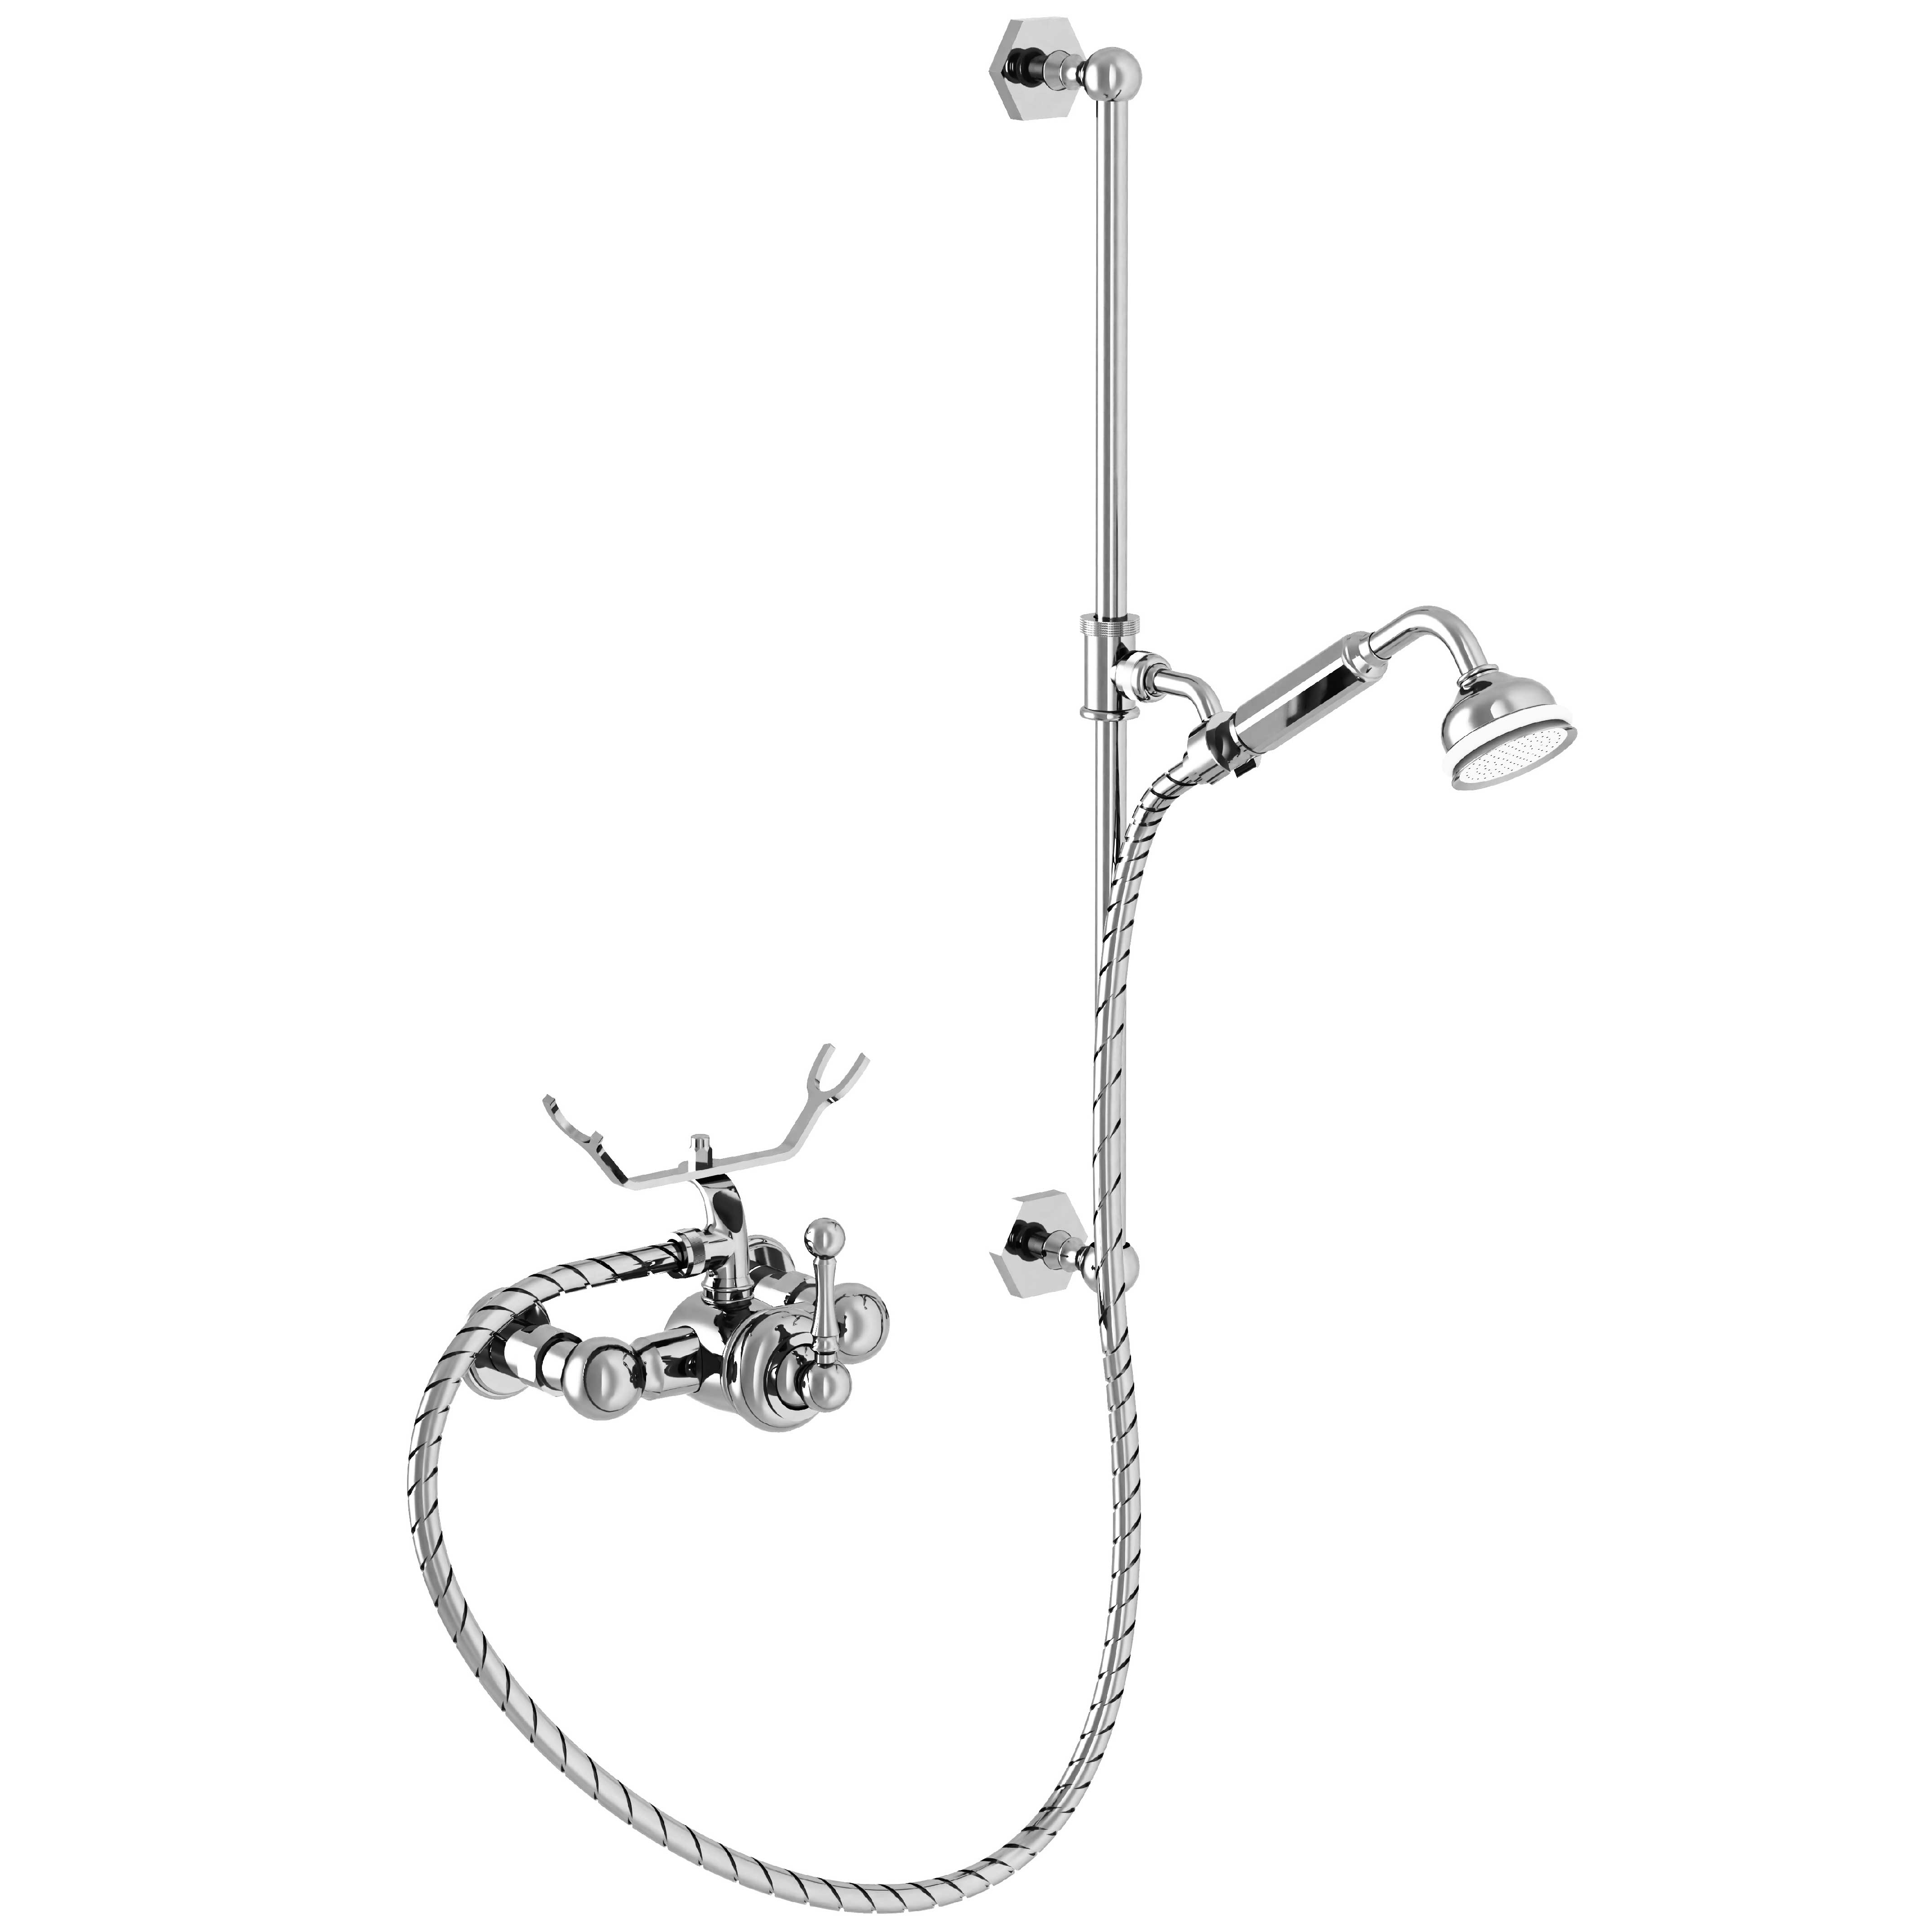 M30-2202M Single-lever shower mixer with sliding bar